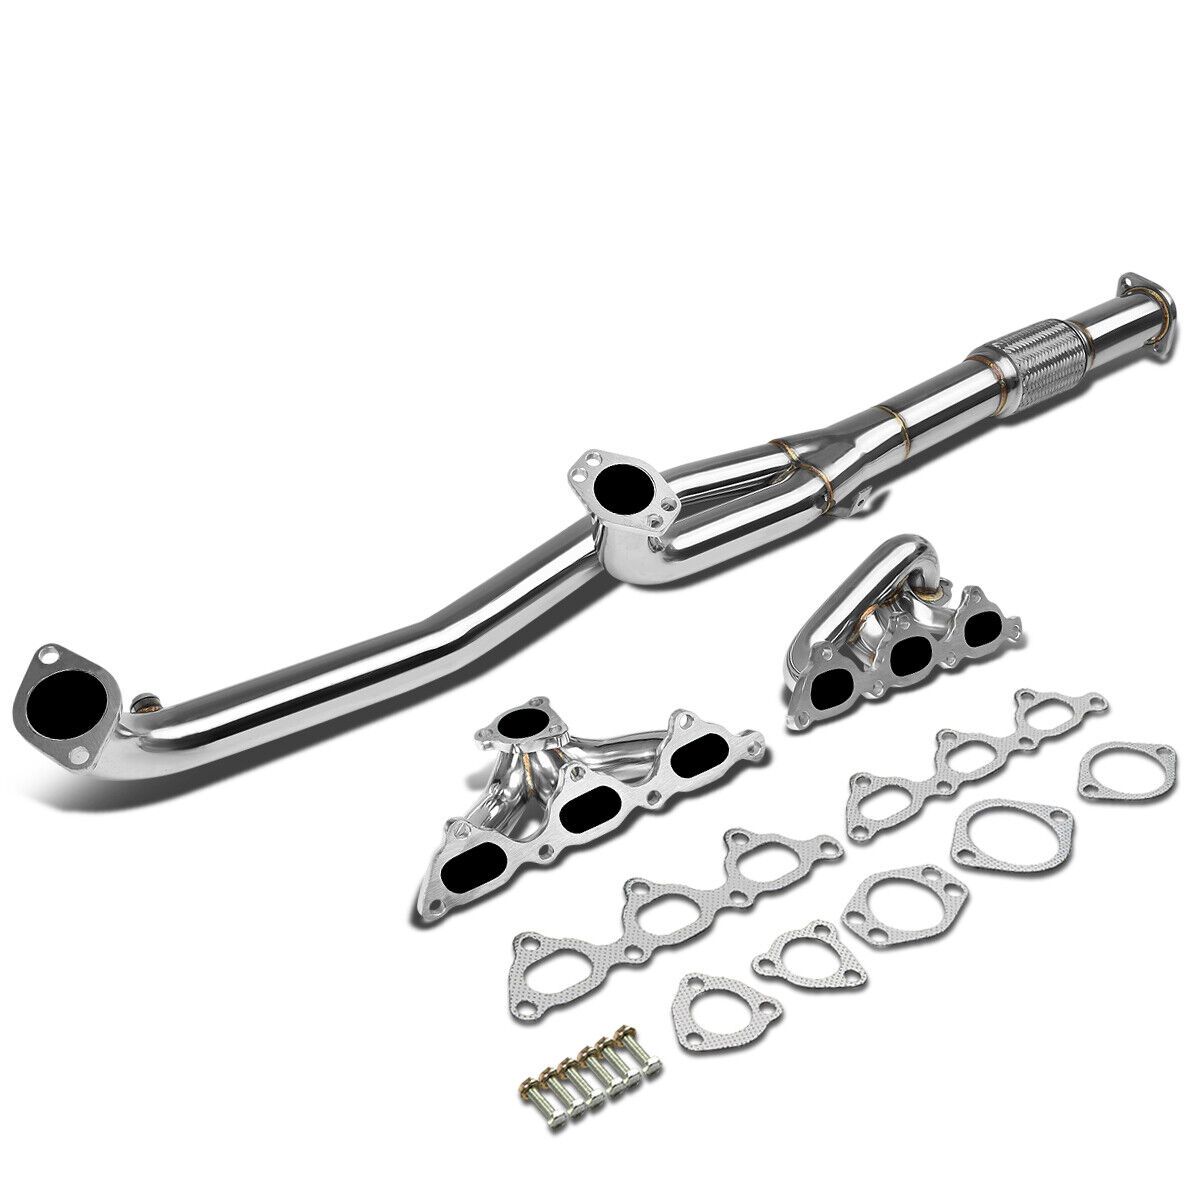 3000GT/GTO STEALTH TURBO STAINLESS STEEL EXHAUST HEADER+DOWNPIPE+GASKET/BOLTS